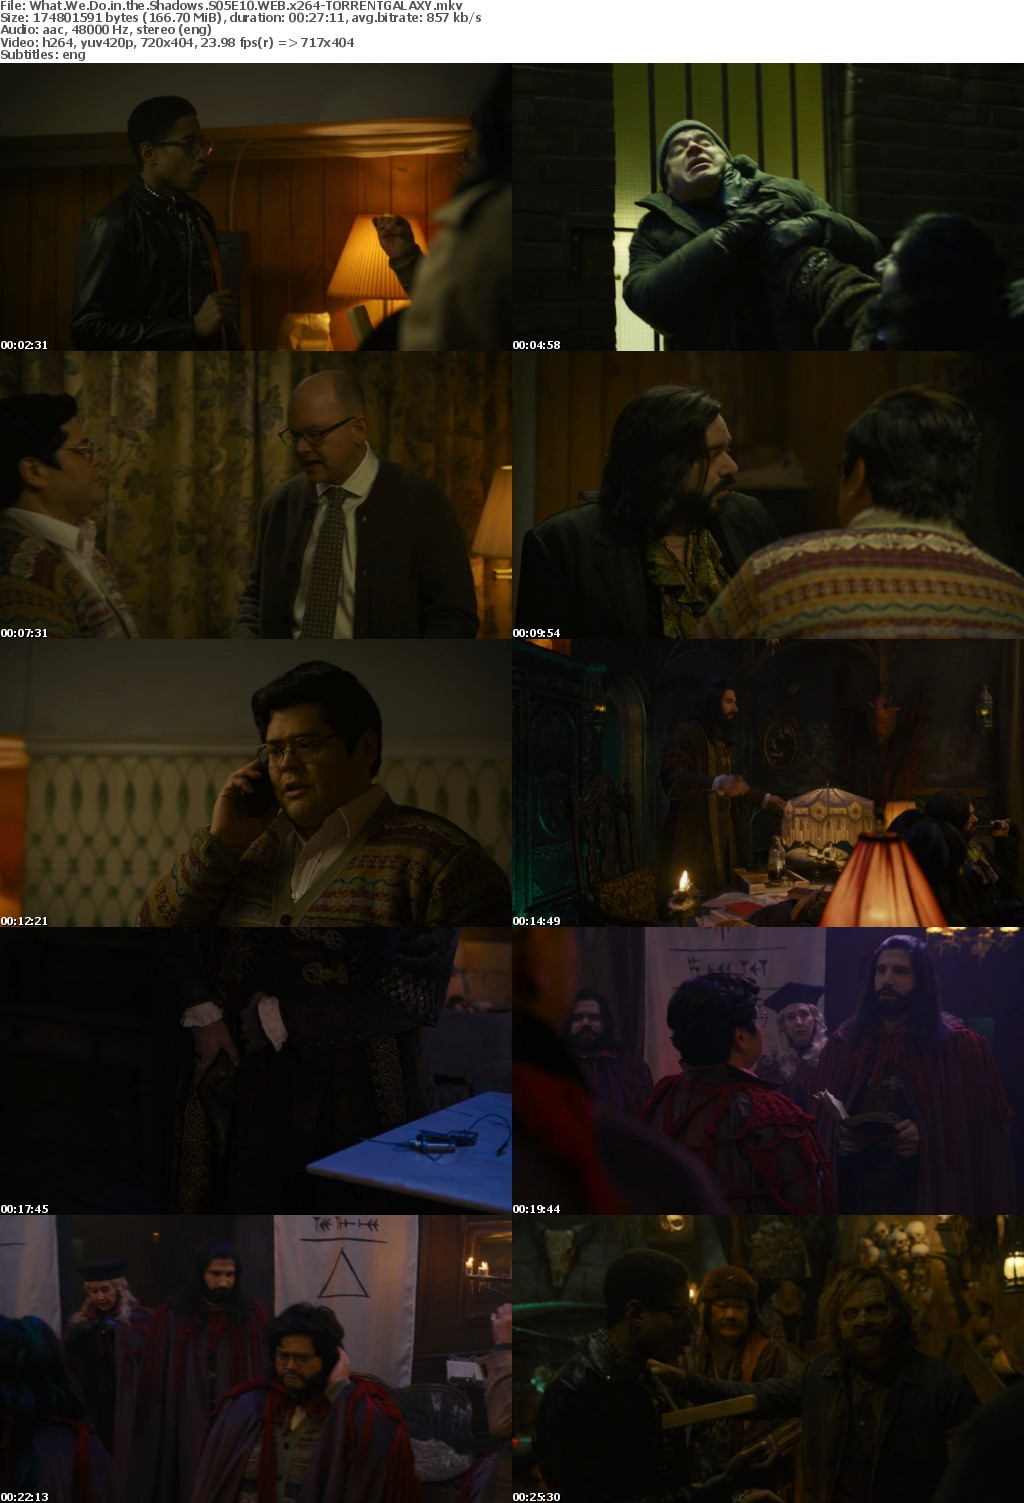 What We Do in the Shadows S05E10 WEB x264-GALAXY